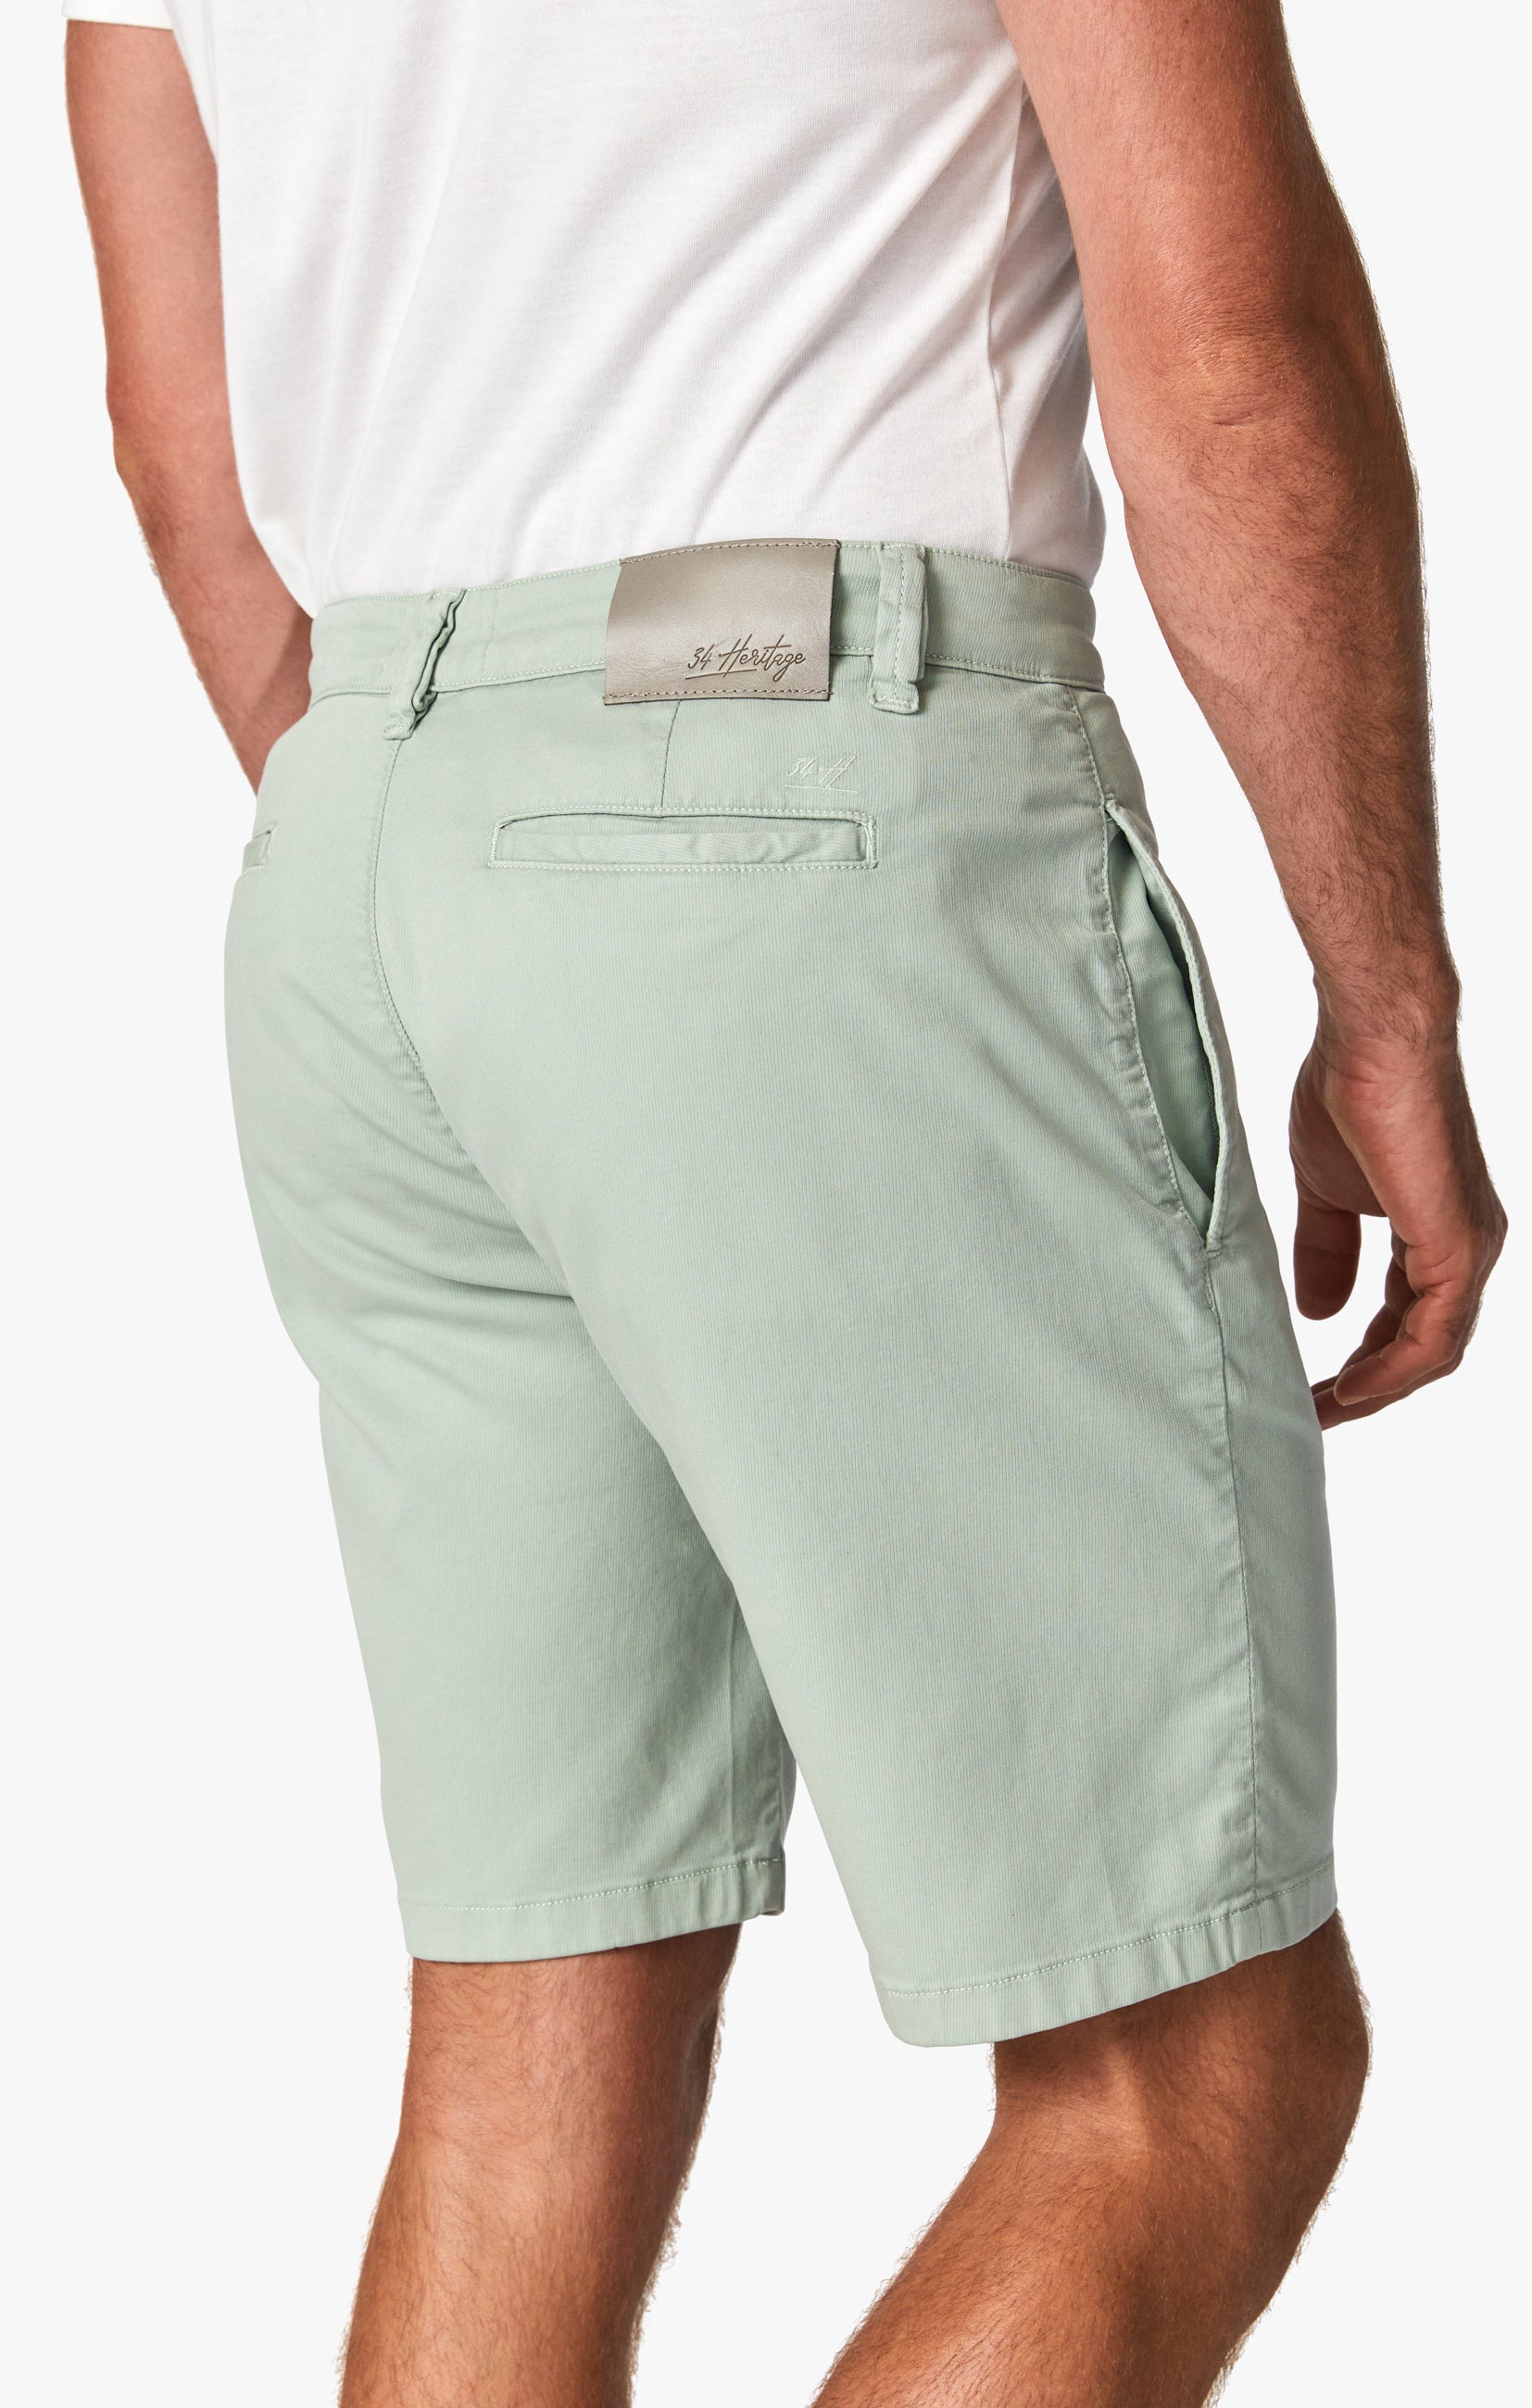 Nevada Shorts In Mint Soft Touch Image 4